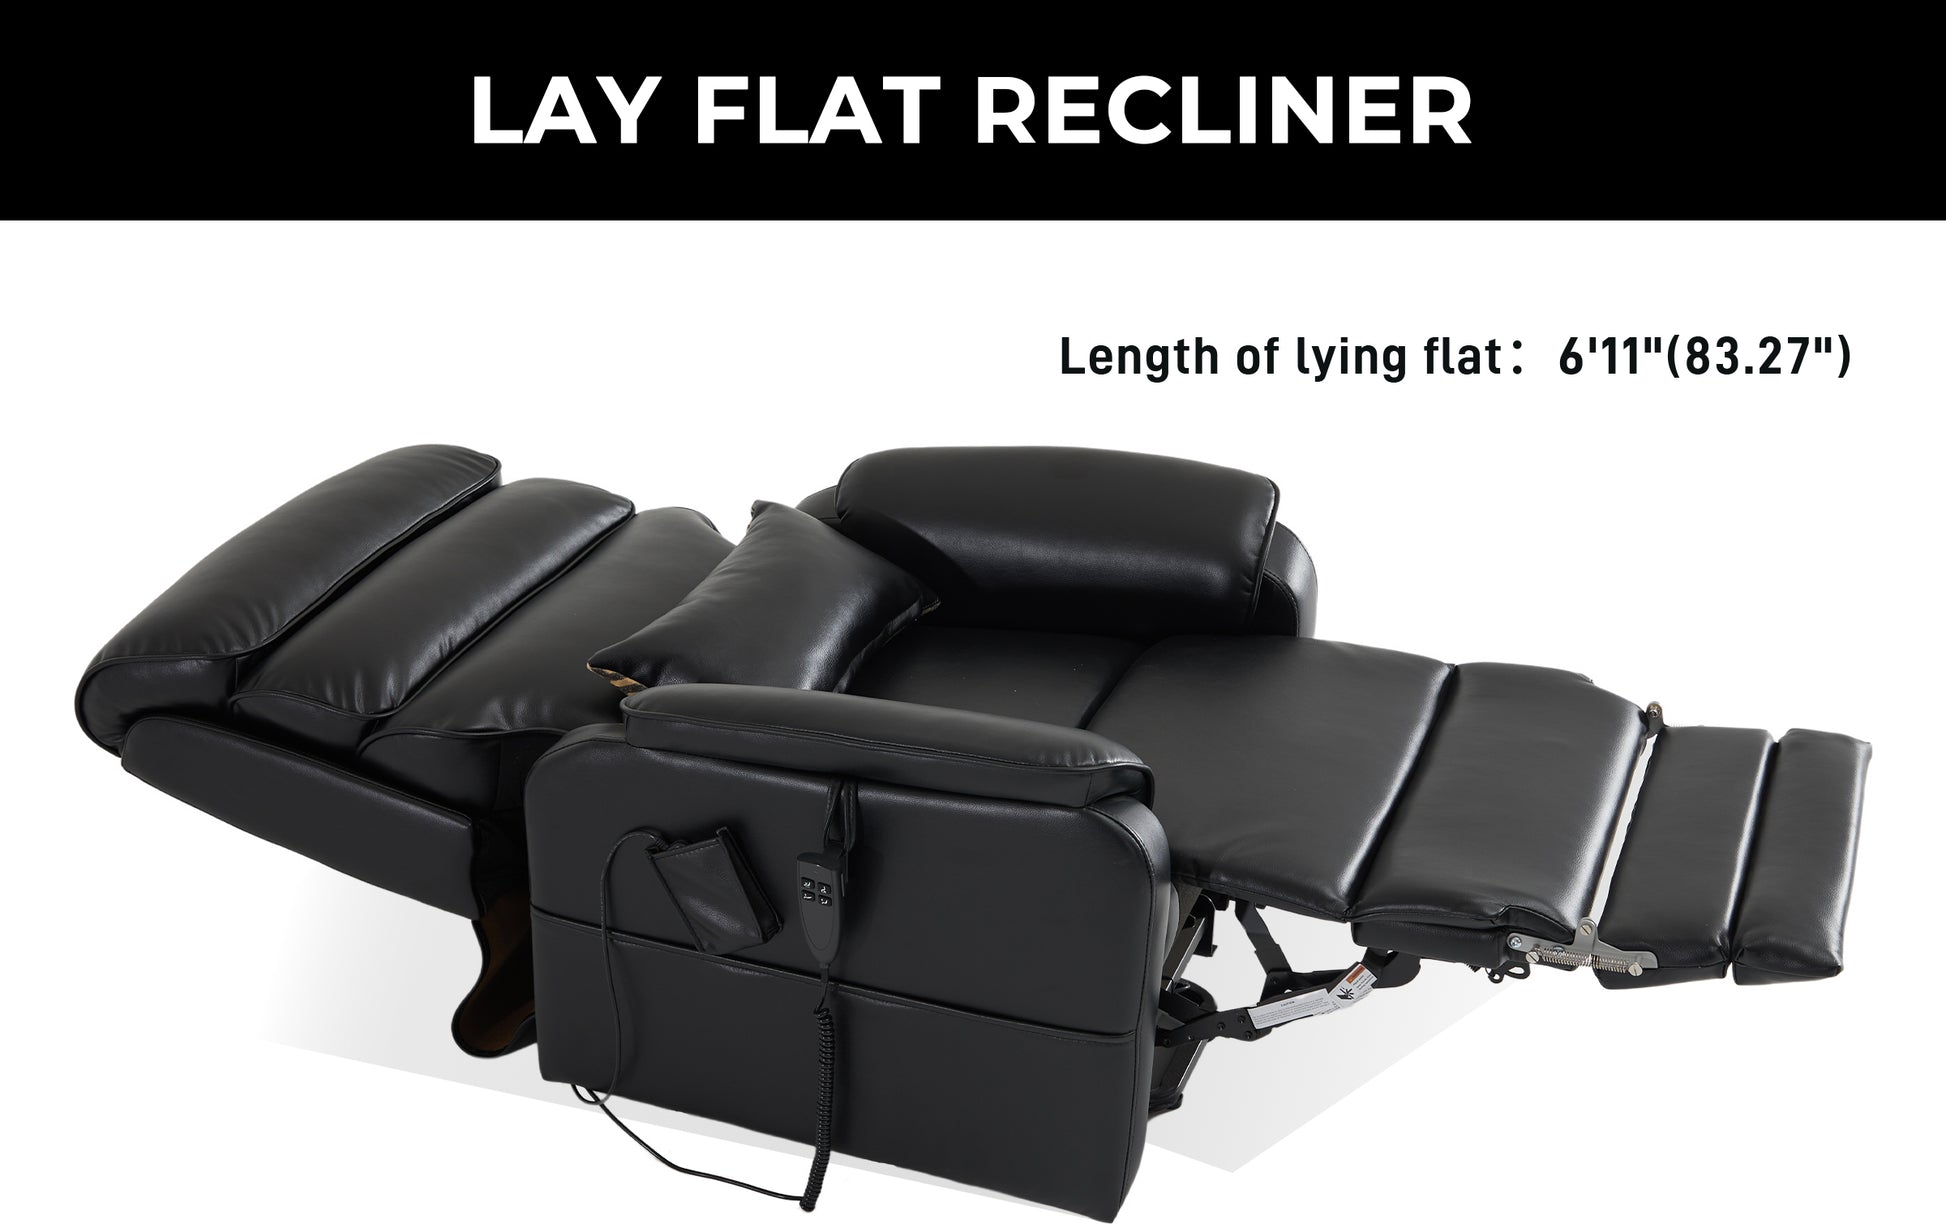 Best Lift Recliner For Tall Man With Heat And Massage